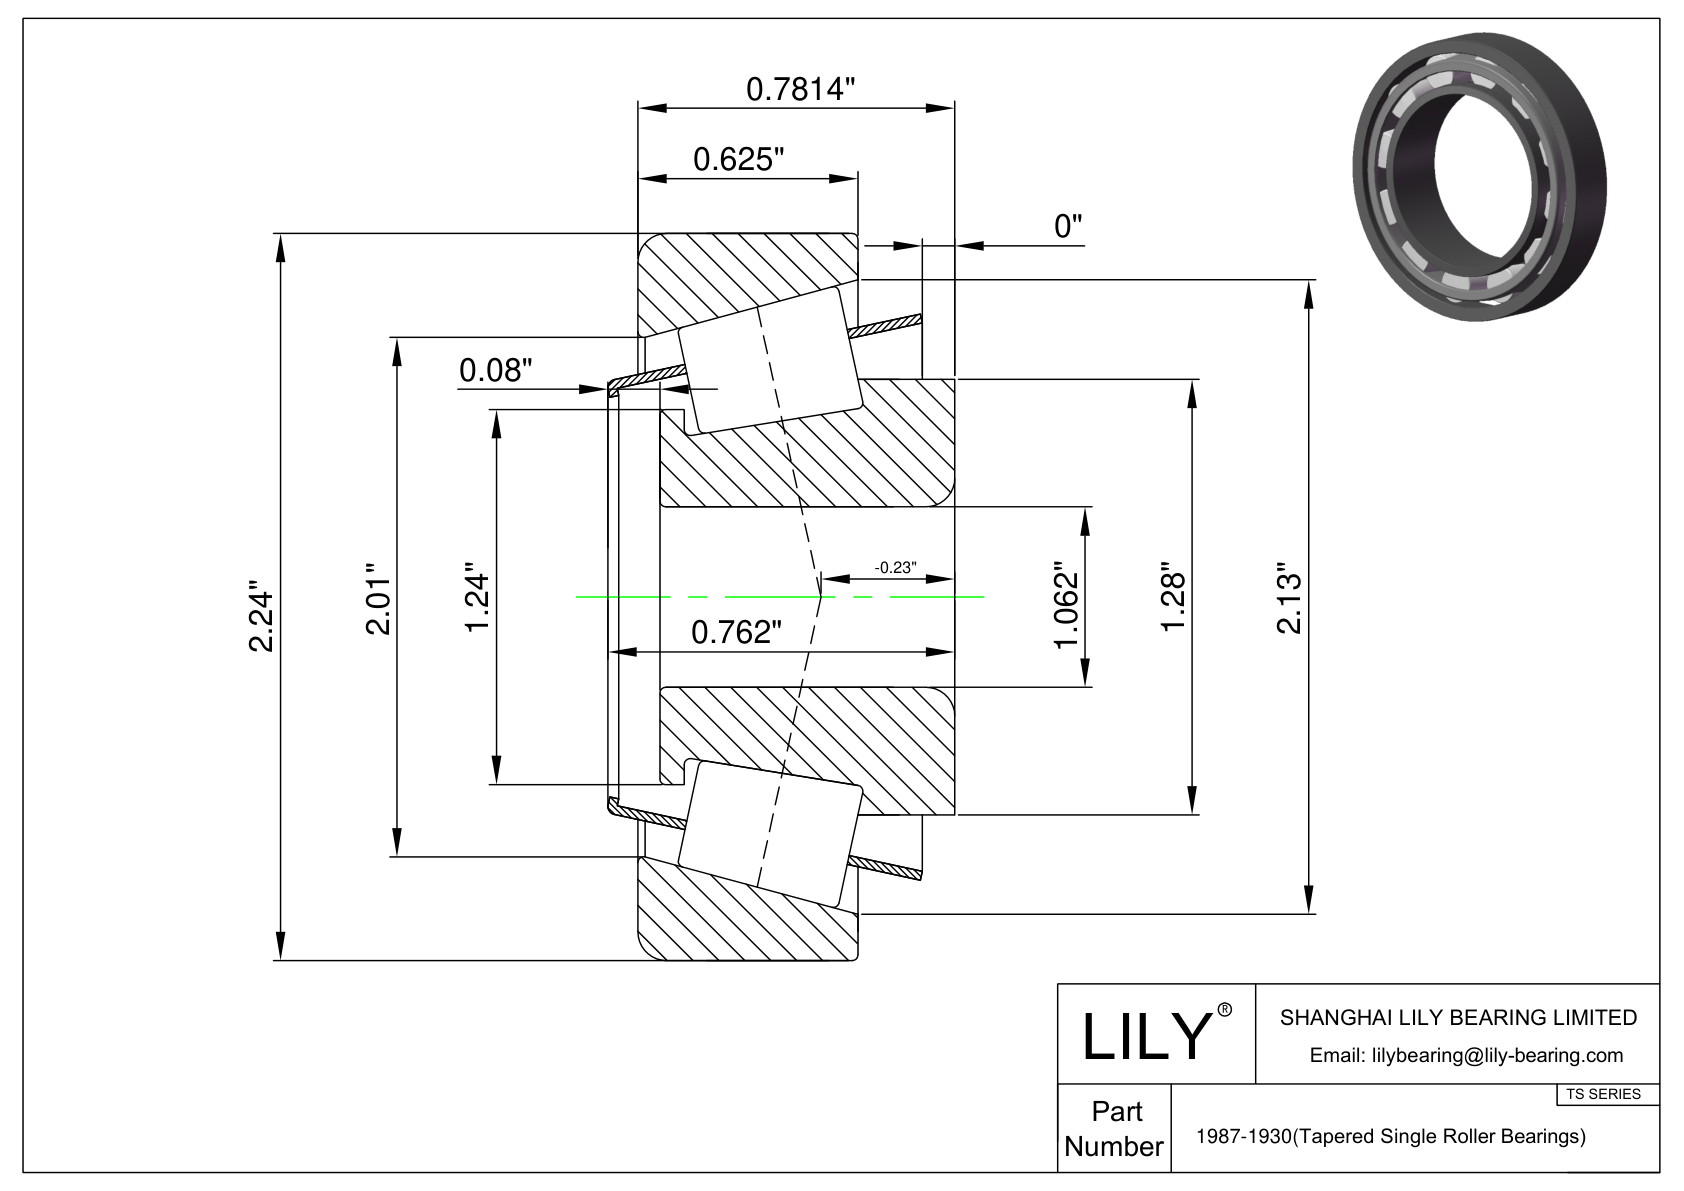 1987-1930 TS (Tapered Single Roller Bearings) (Imperial) cad drawing